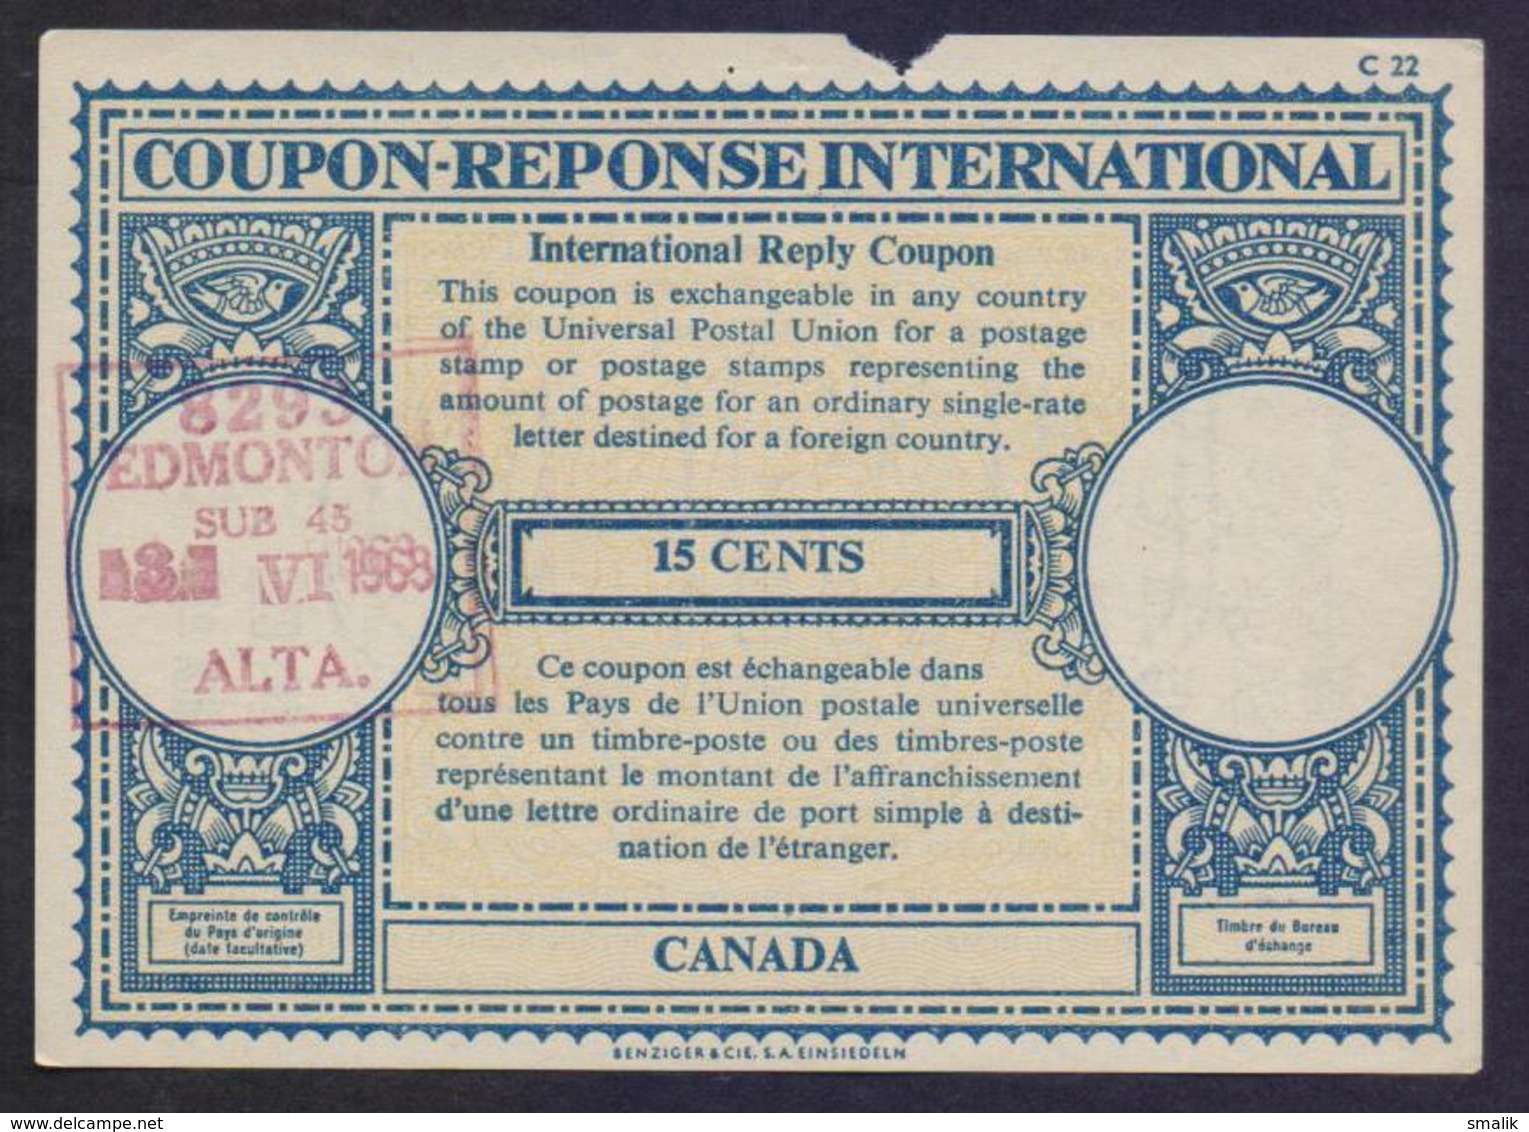 CANADA - 15 Cents London Type IRC COUPON REPONSE INTERNATIONAL REPLY, UPU, Cancelled 3.6.1968, Minor Broken - Coupons-Réponses